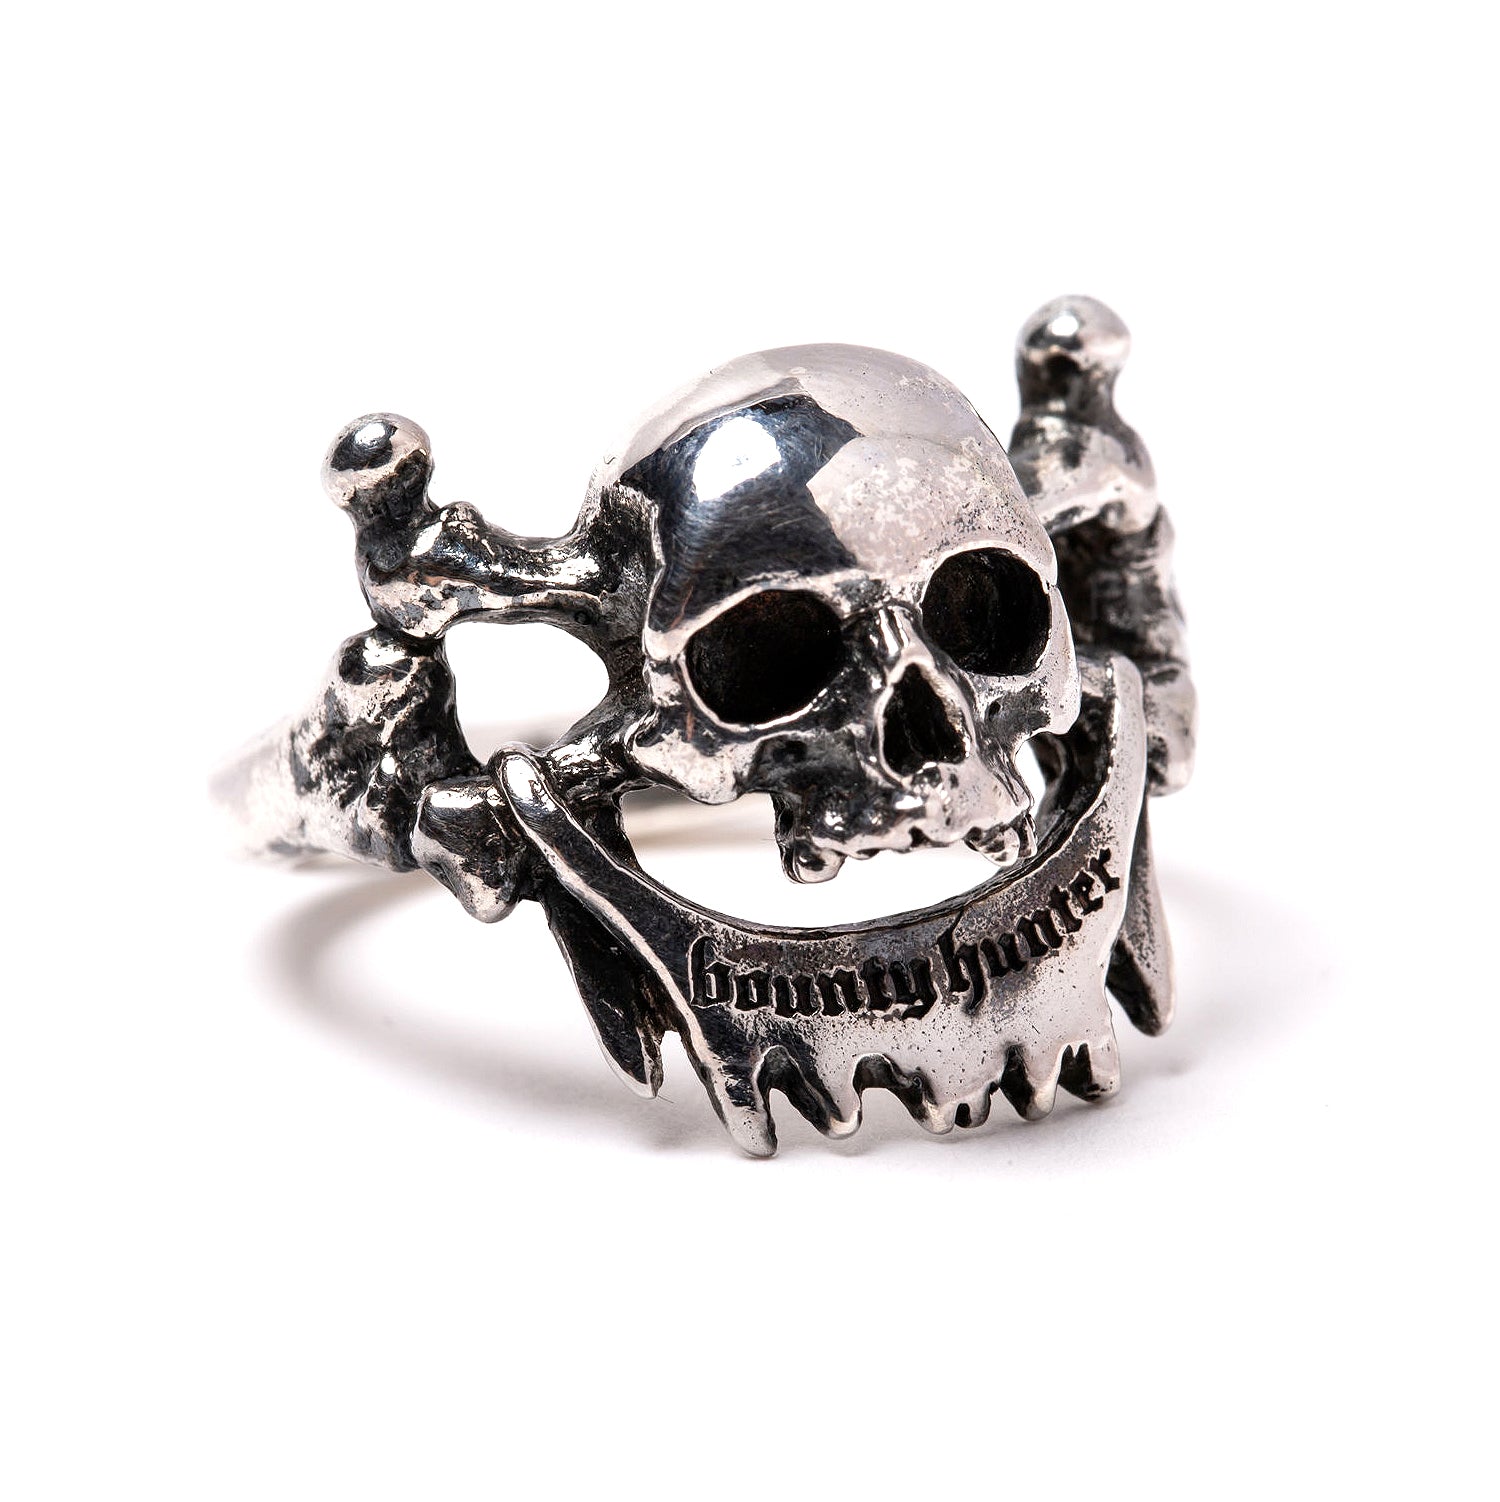 Bounty Hunter x Dog State UK Skull Ring Silver – Laced